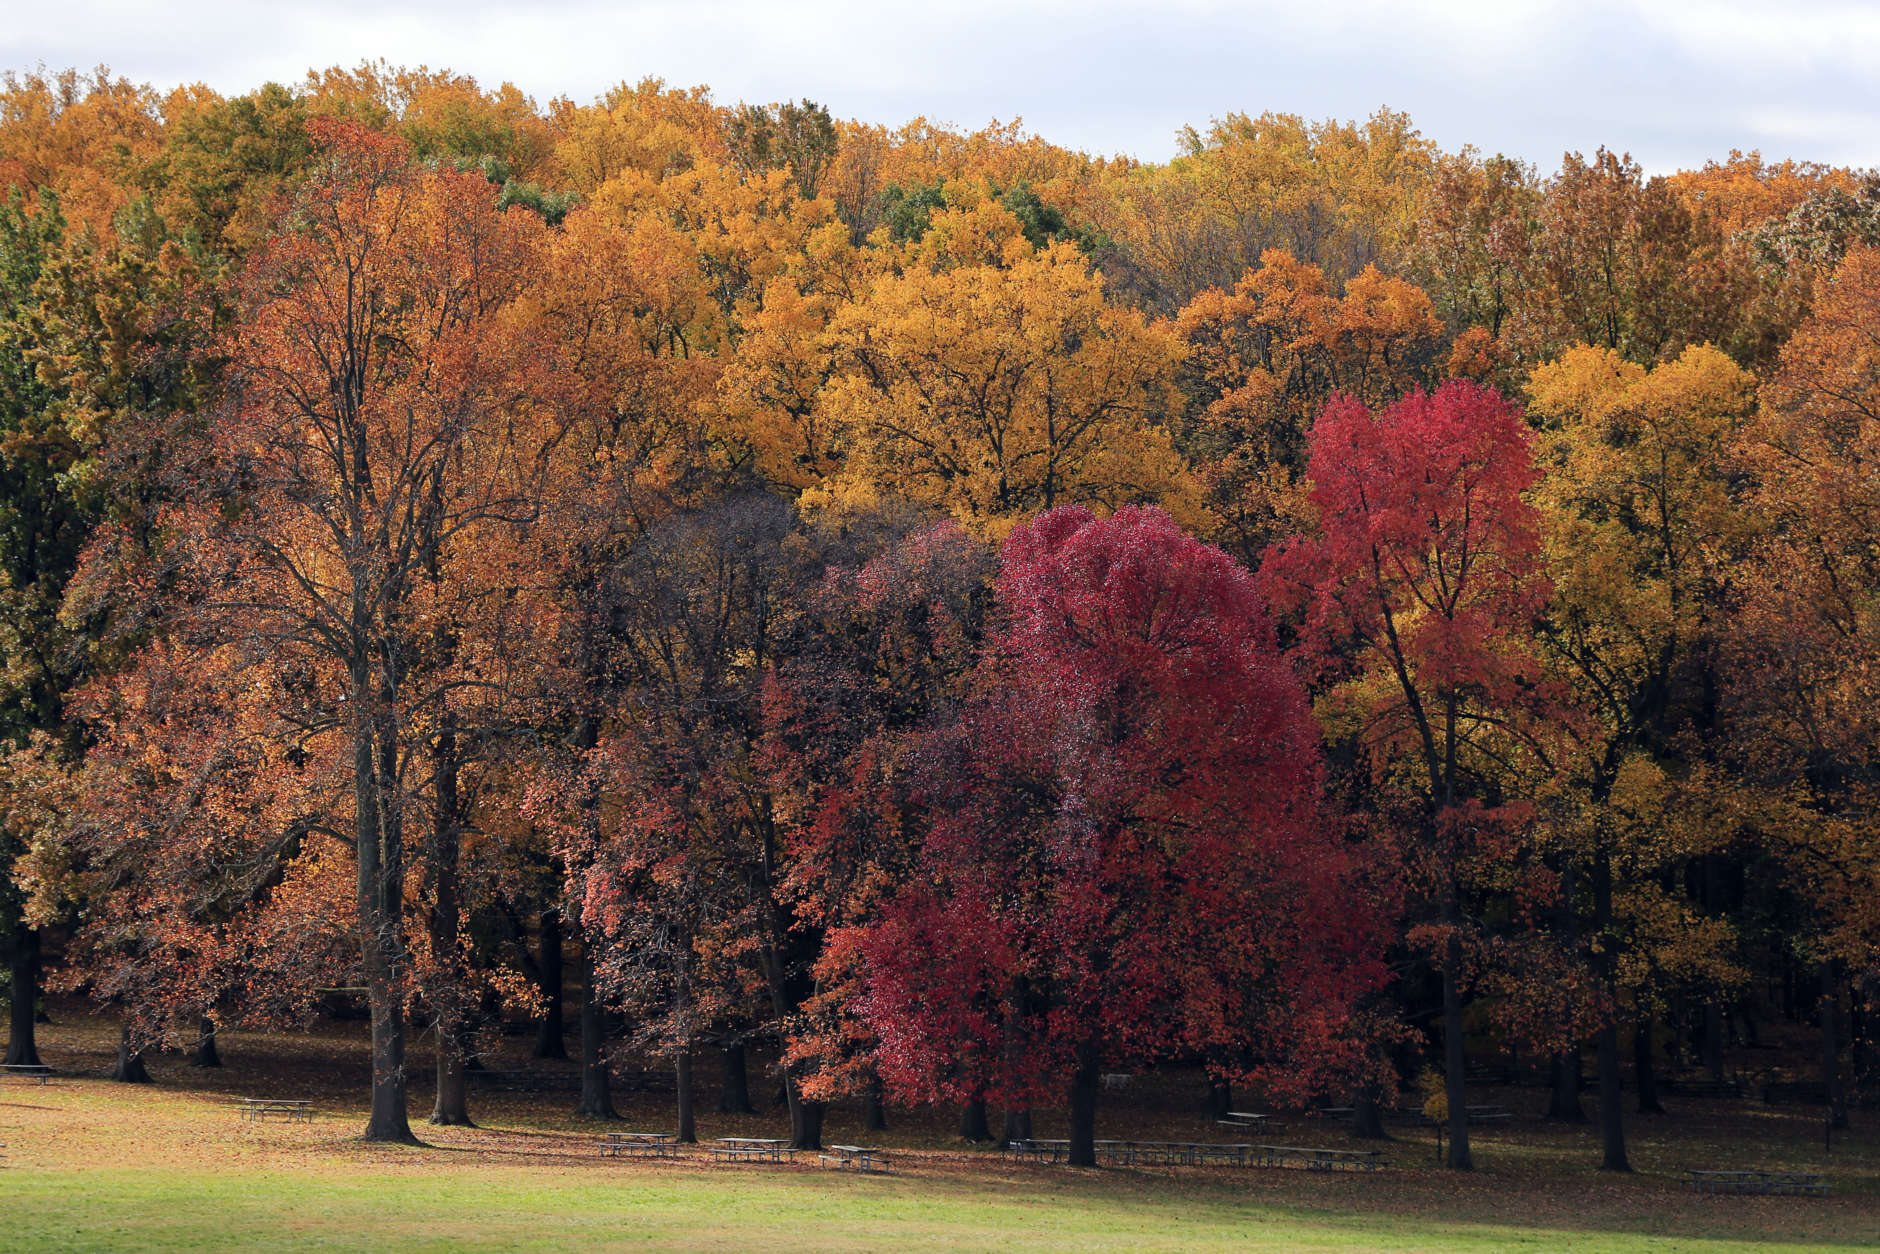 Autumn foliage on Friday, Oct. 30, 2015, at Valley Forge National Historical Park in Valley Forge, Pa. (AP Photo/Matt Rourke)